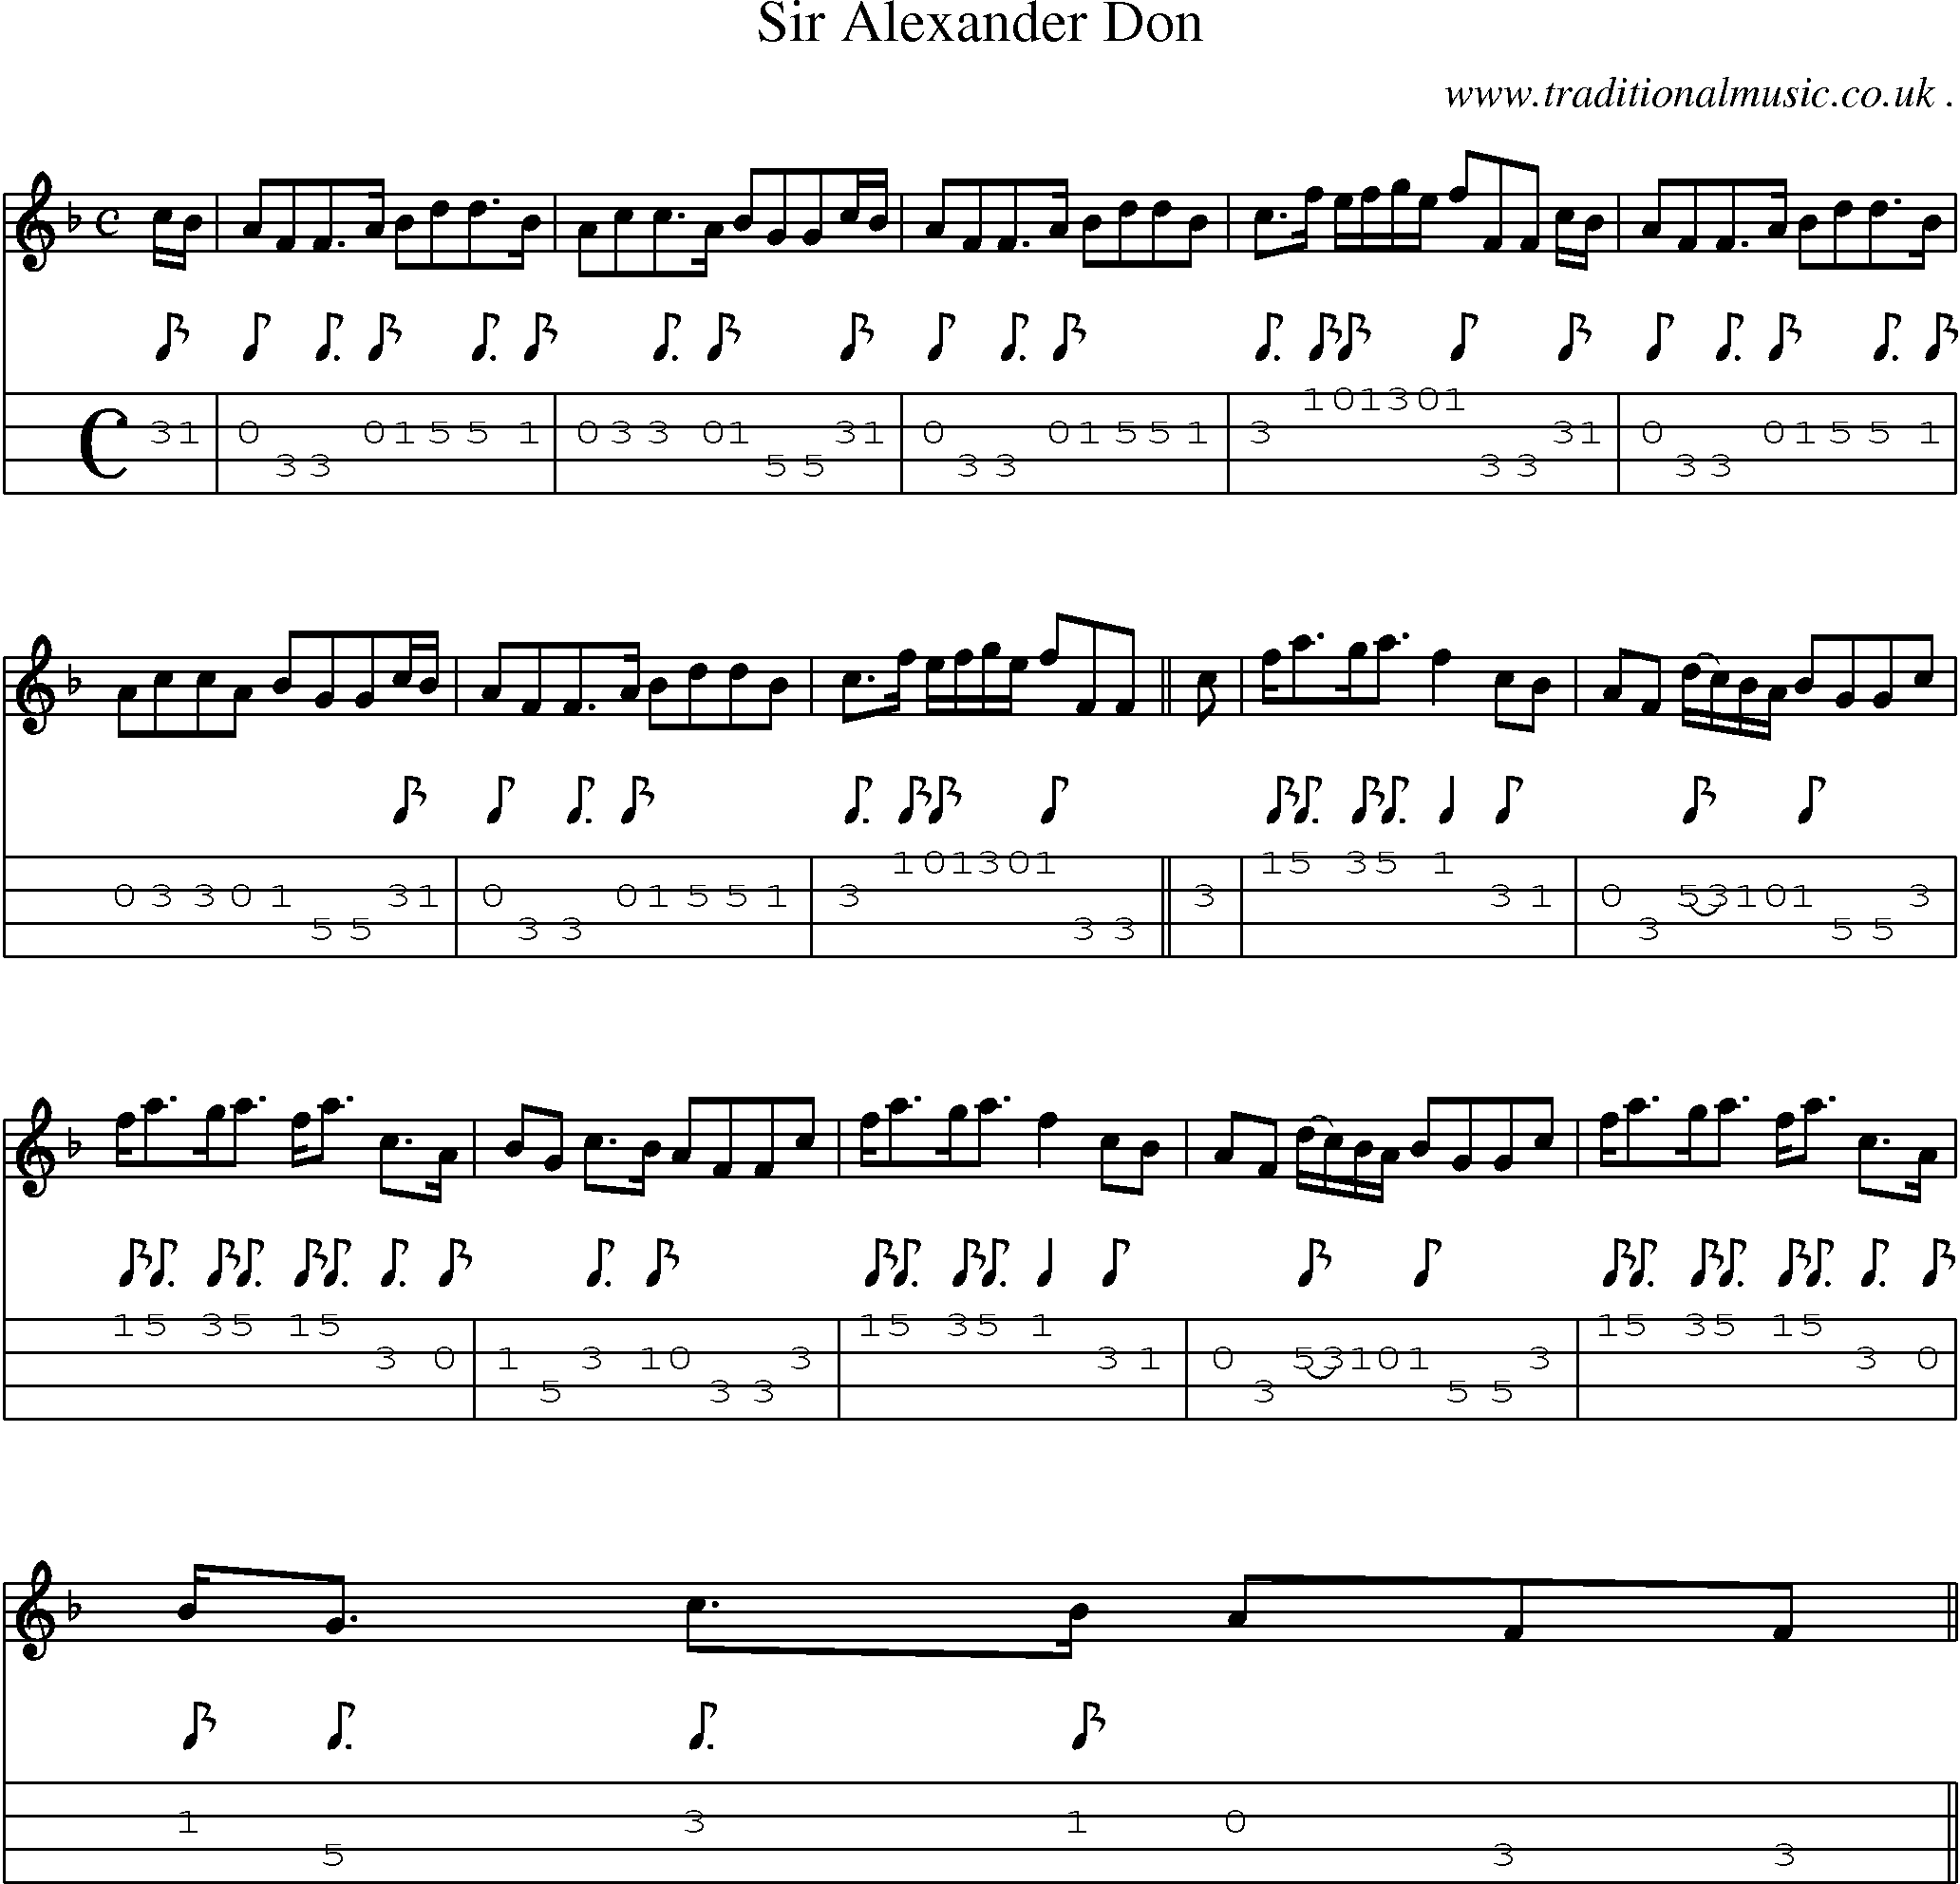 Sheet-music  score, Chords and Mandolin Tabs for Sir Alexander Don